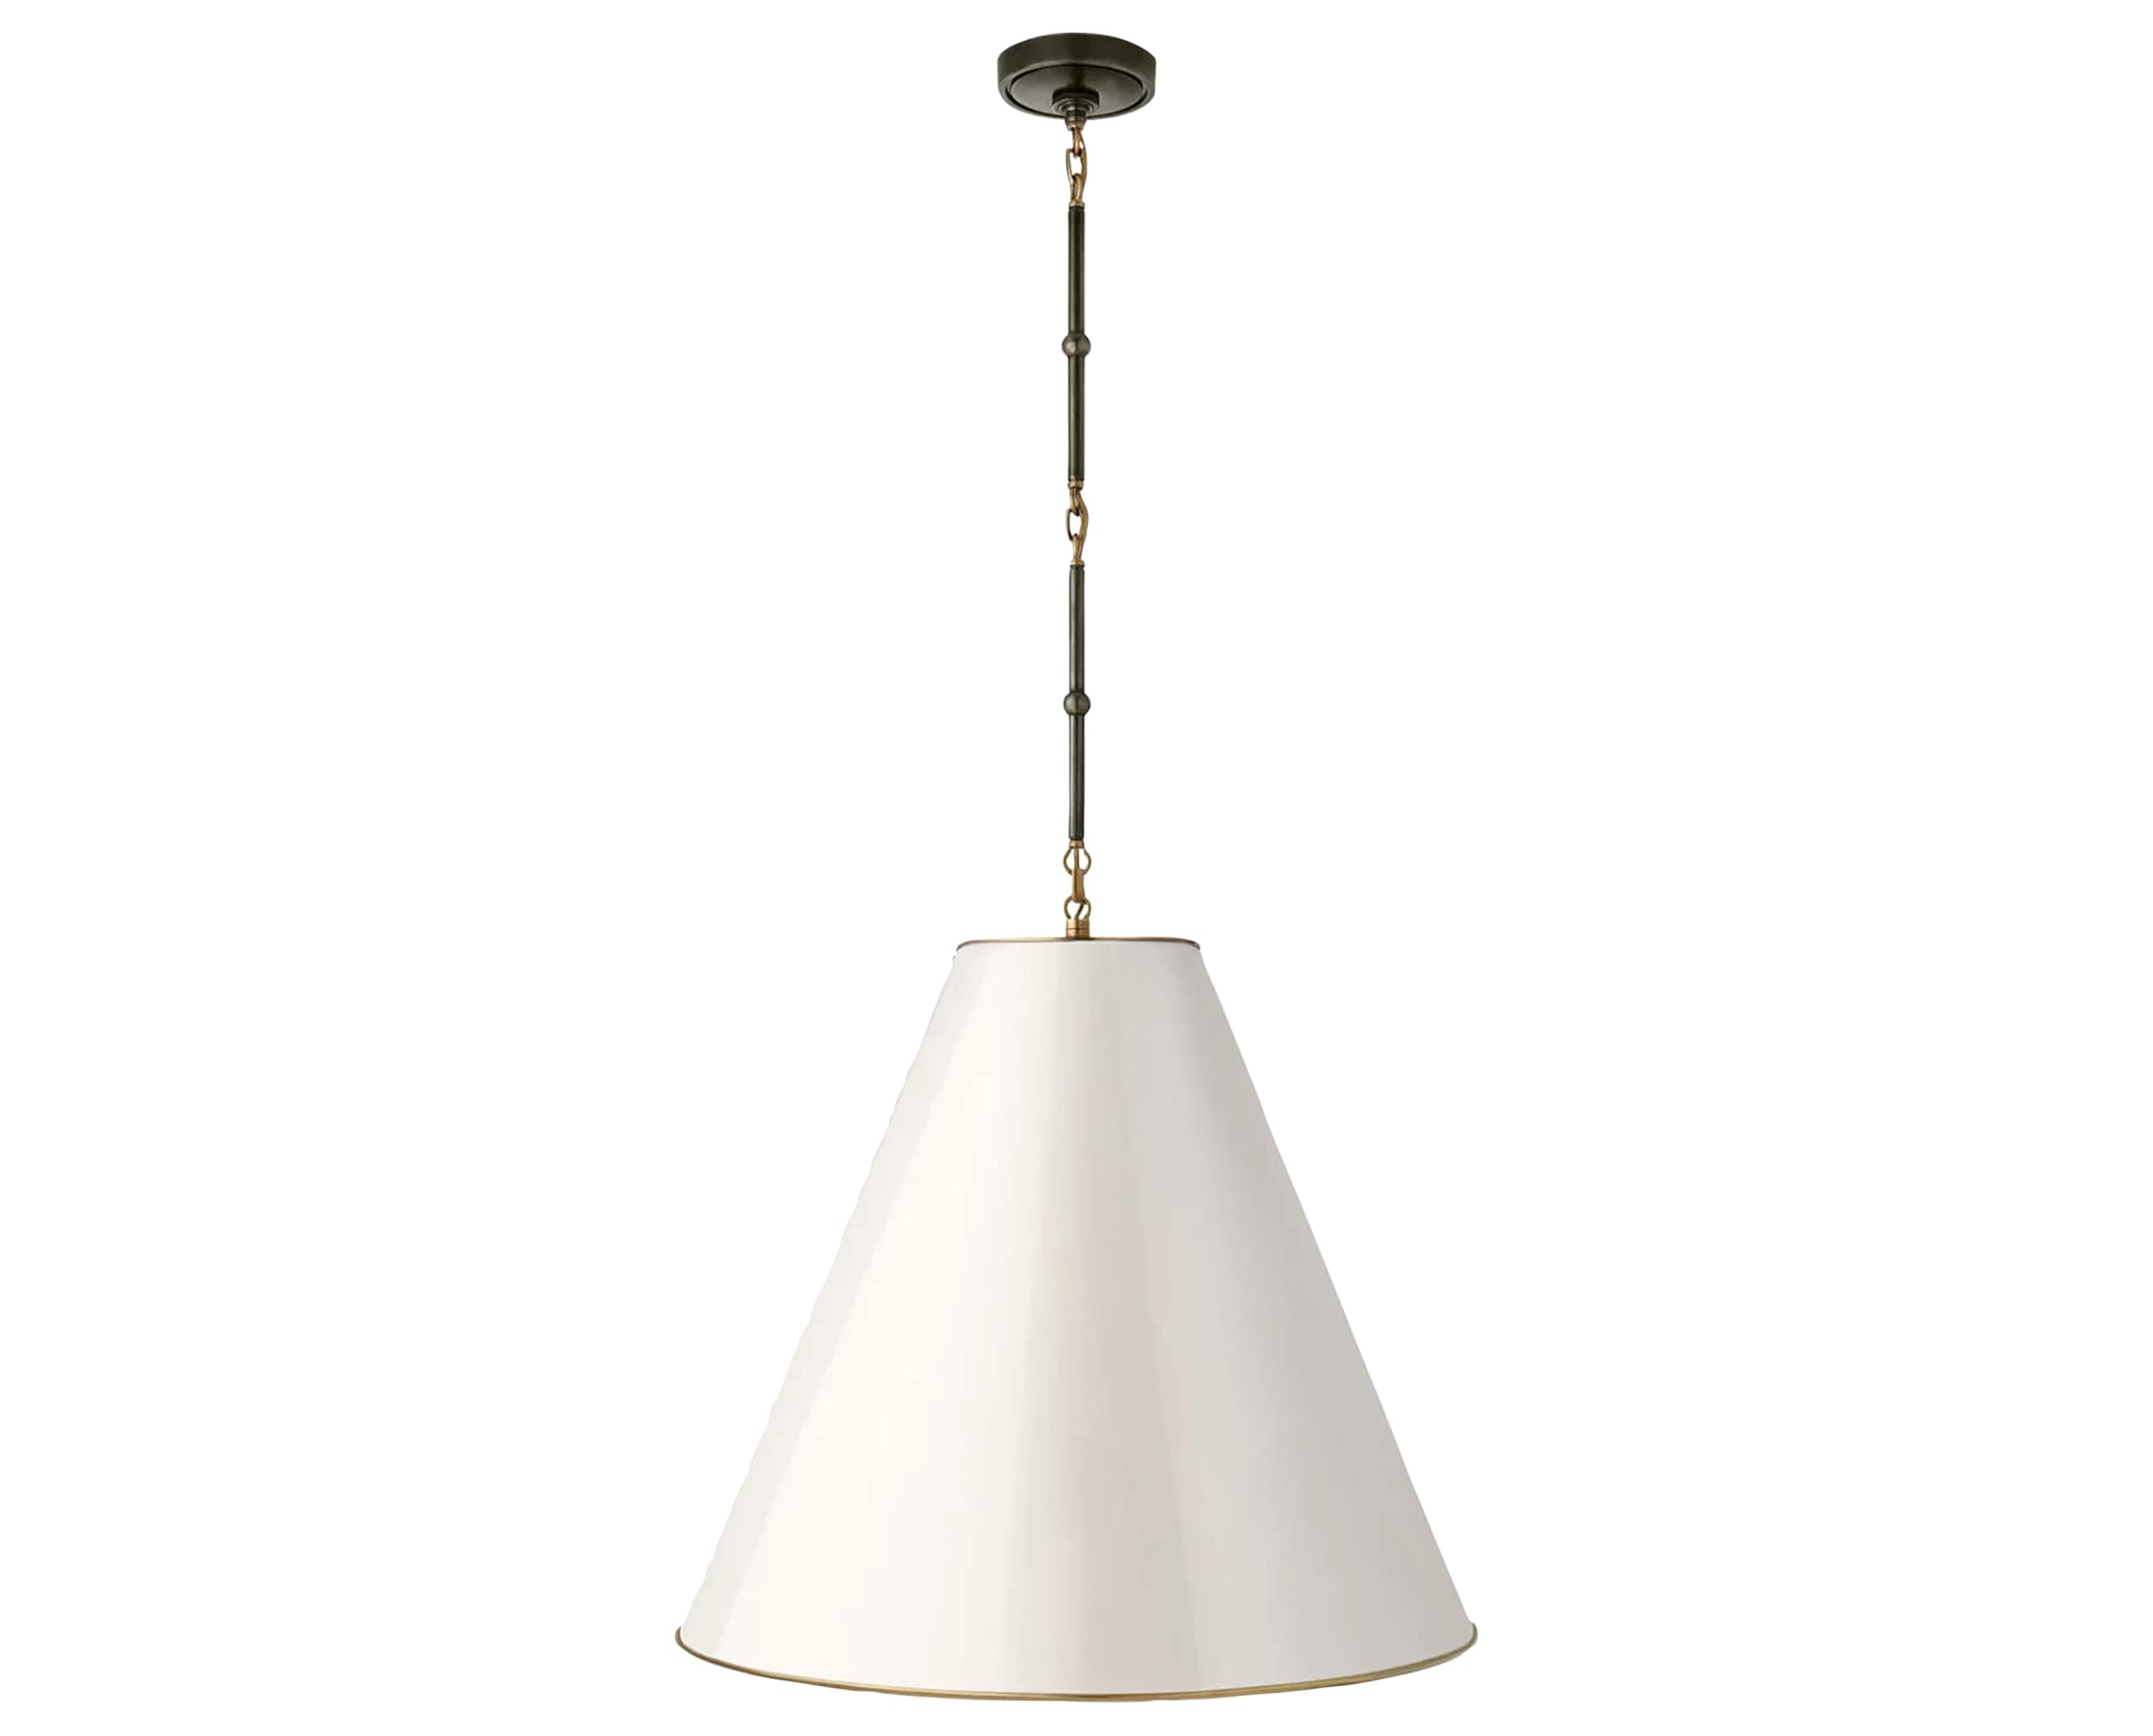 Bronze and Antique Brass with Antique White | Goodman Large Hanging Lamp | Valley Ridge Furniture